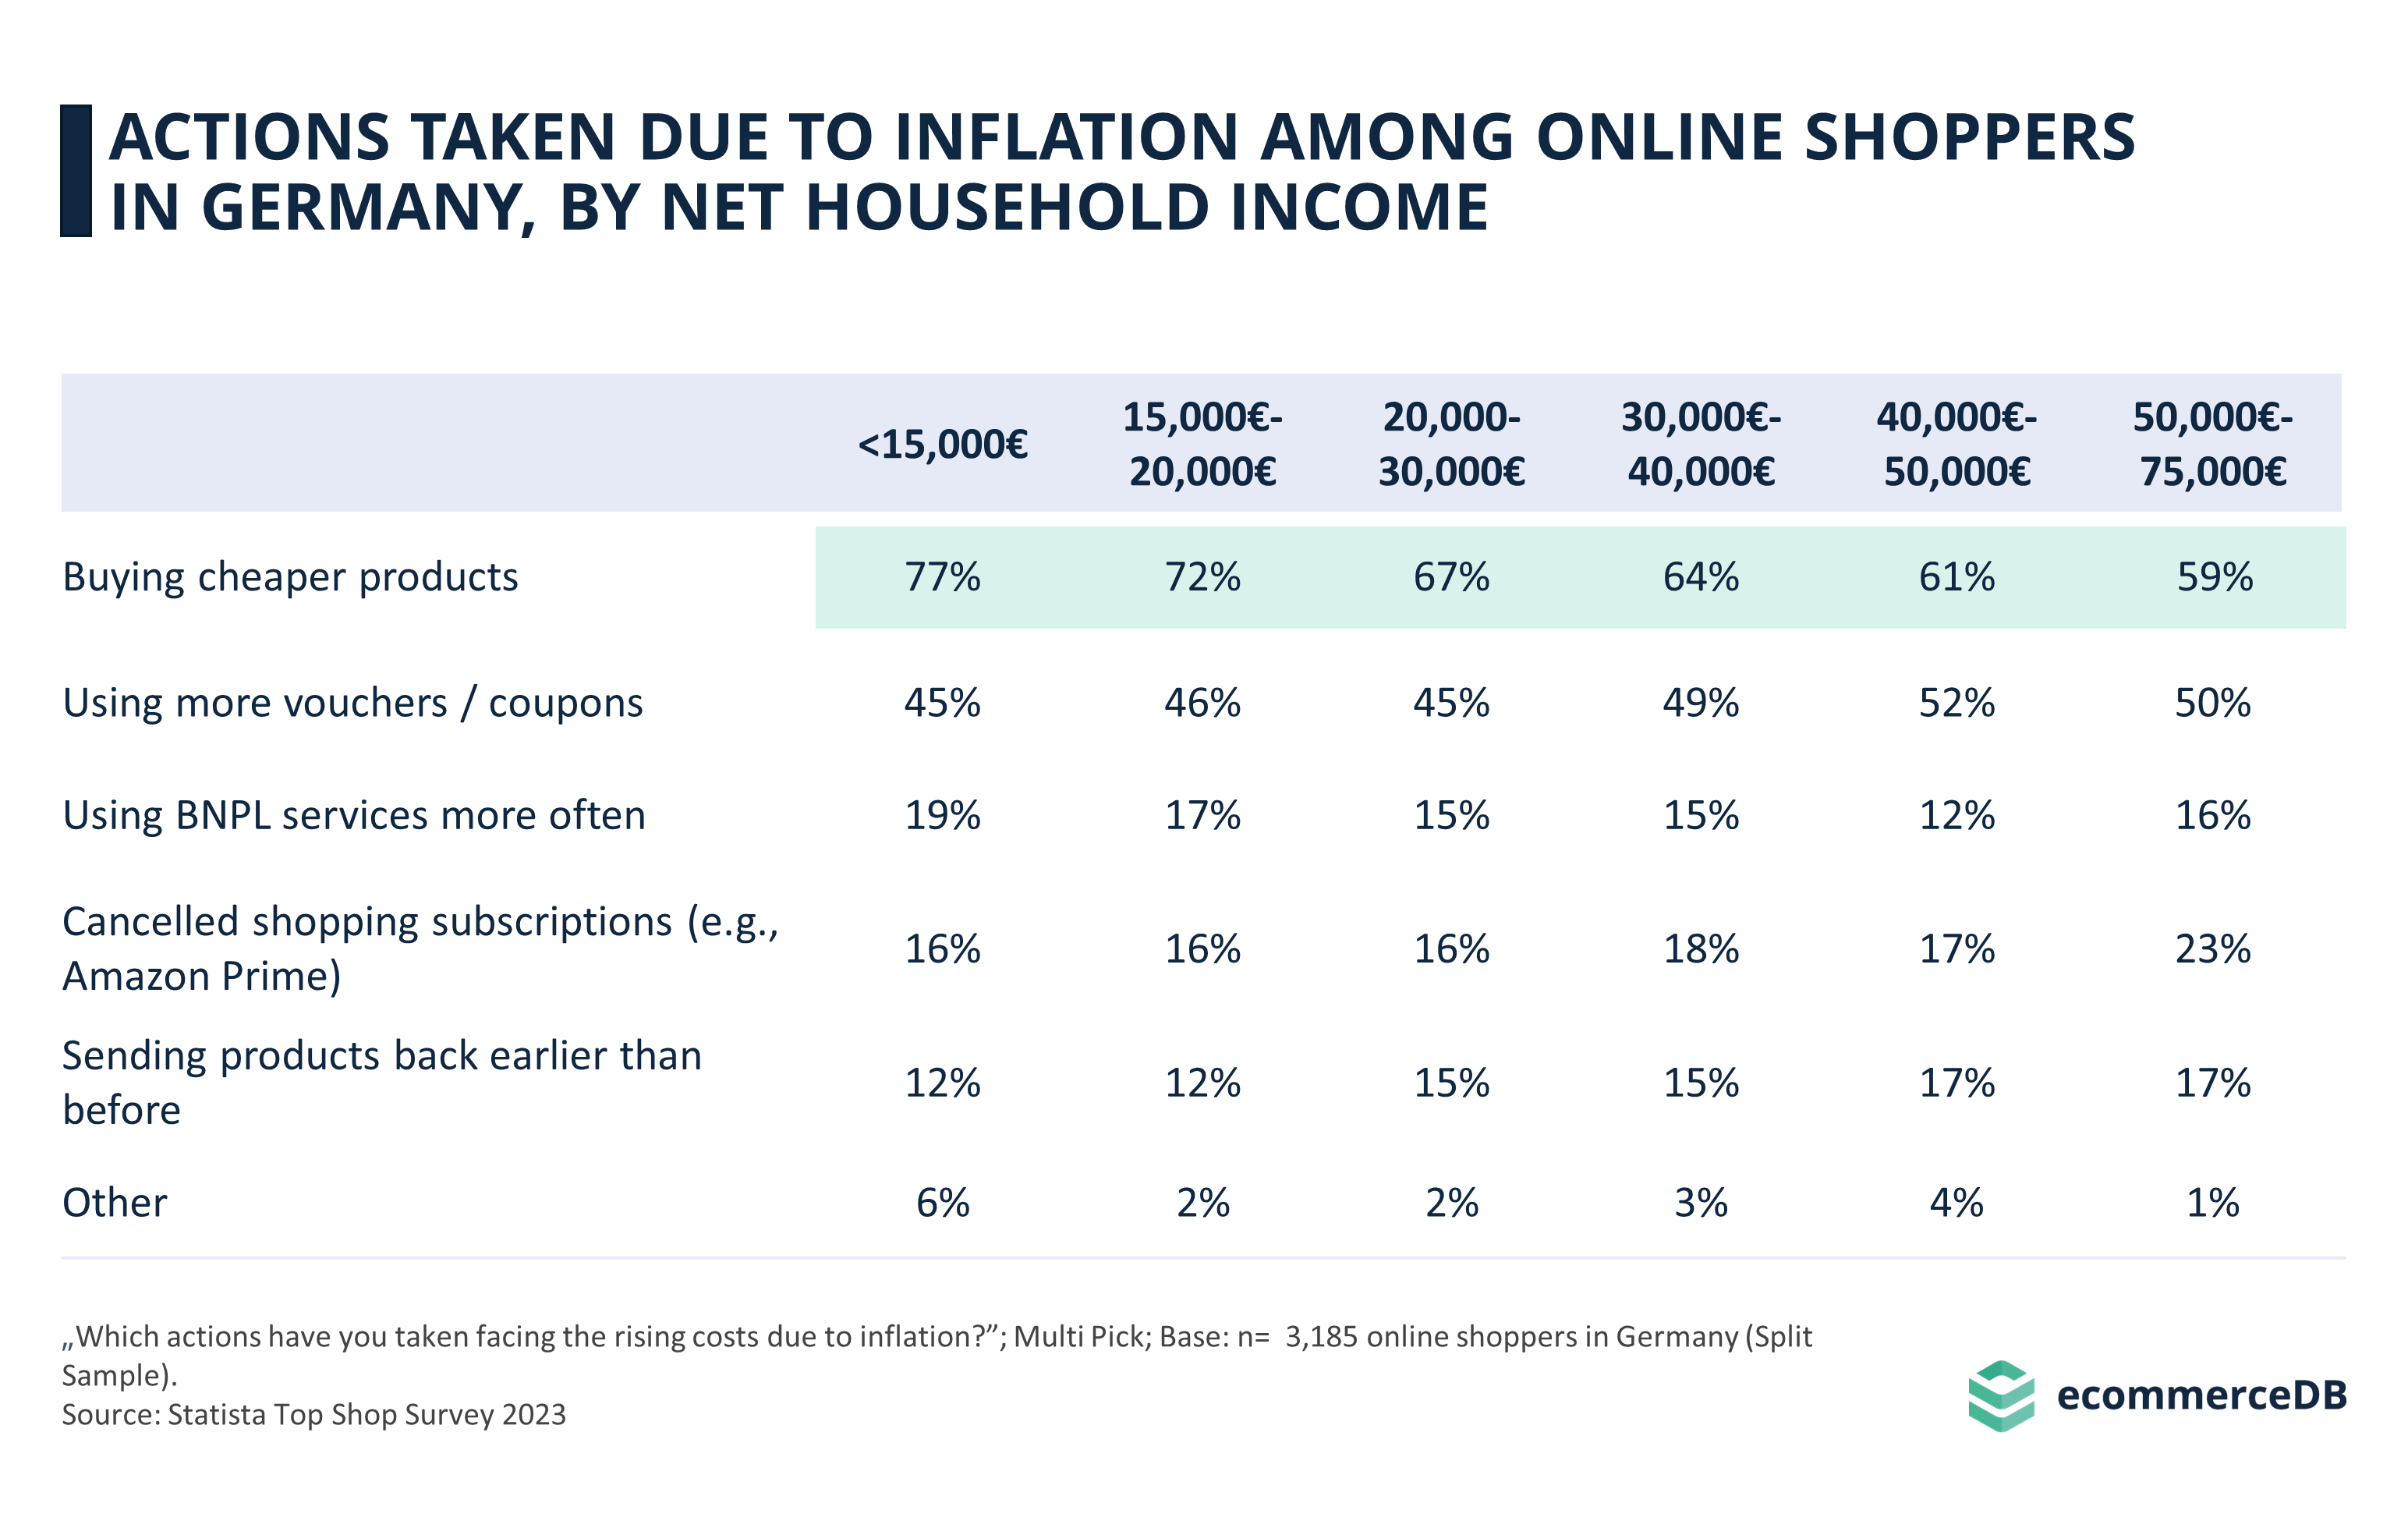 Actions Taken by Online Shoppers Due to Inflation by Income